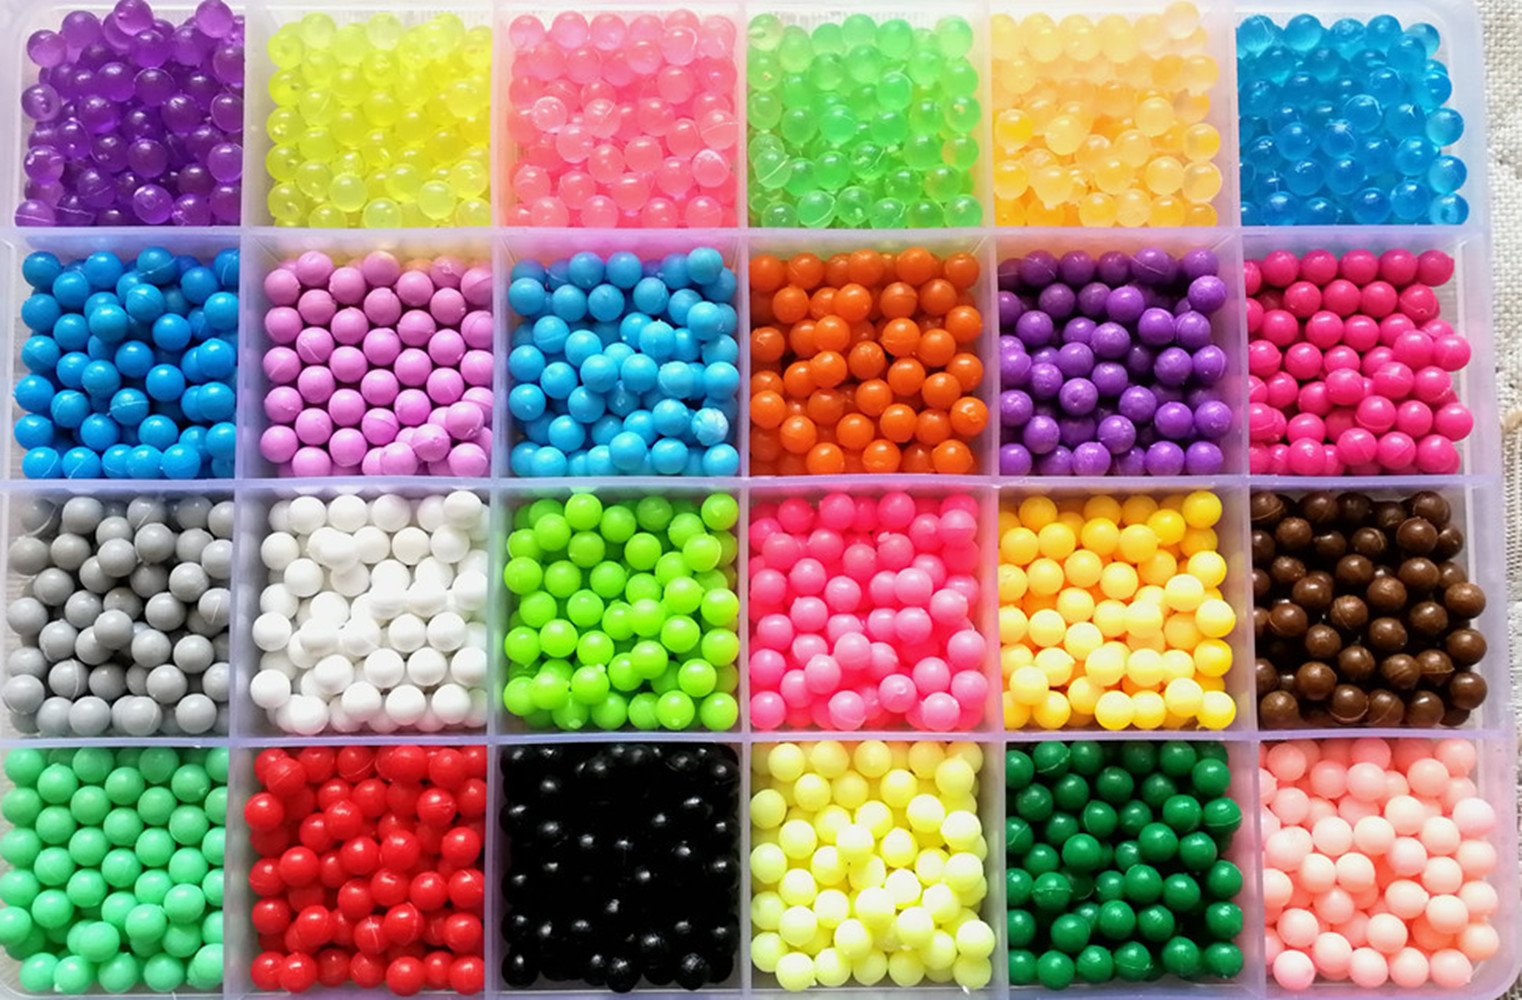 Wholesale 12 Colors 1800pcs Round Water Fuse Beads Kits for Kids 